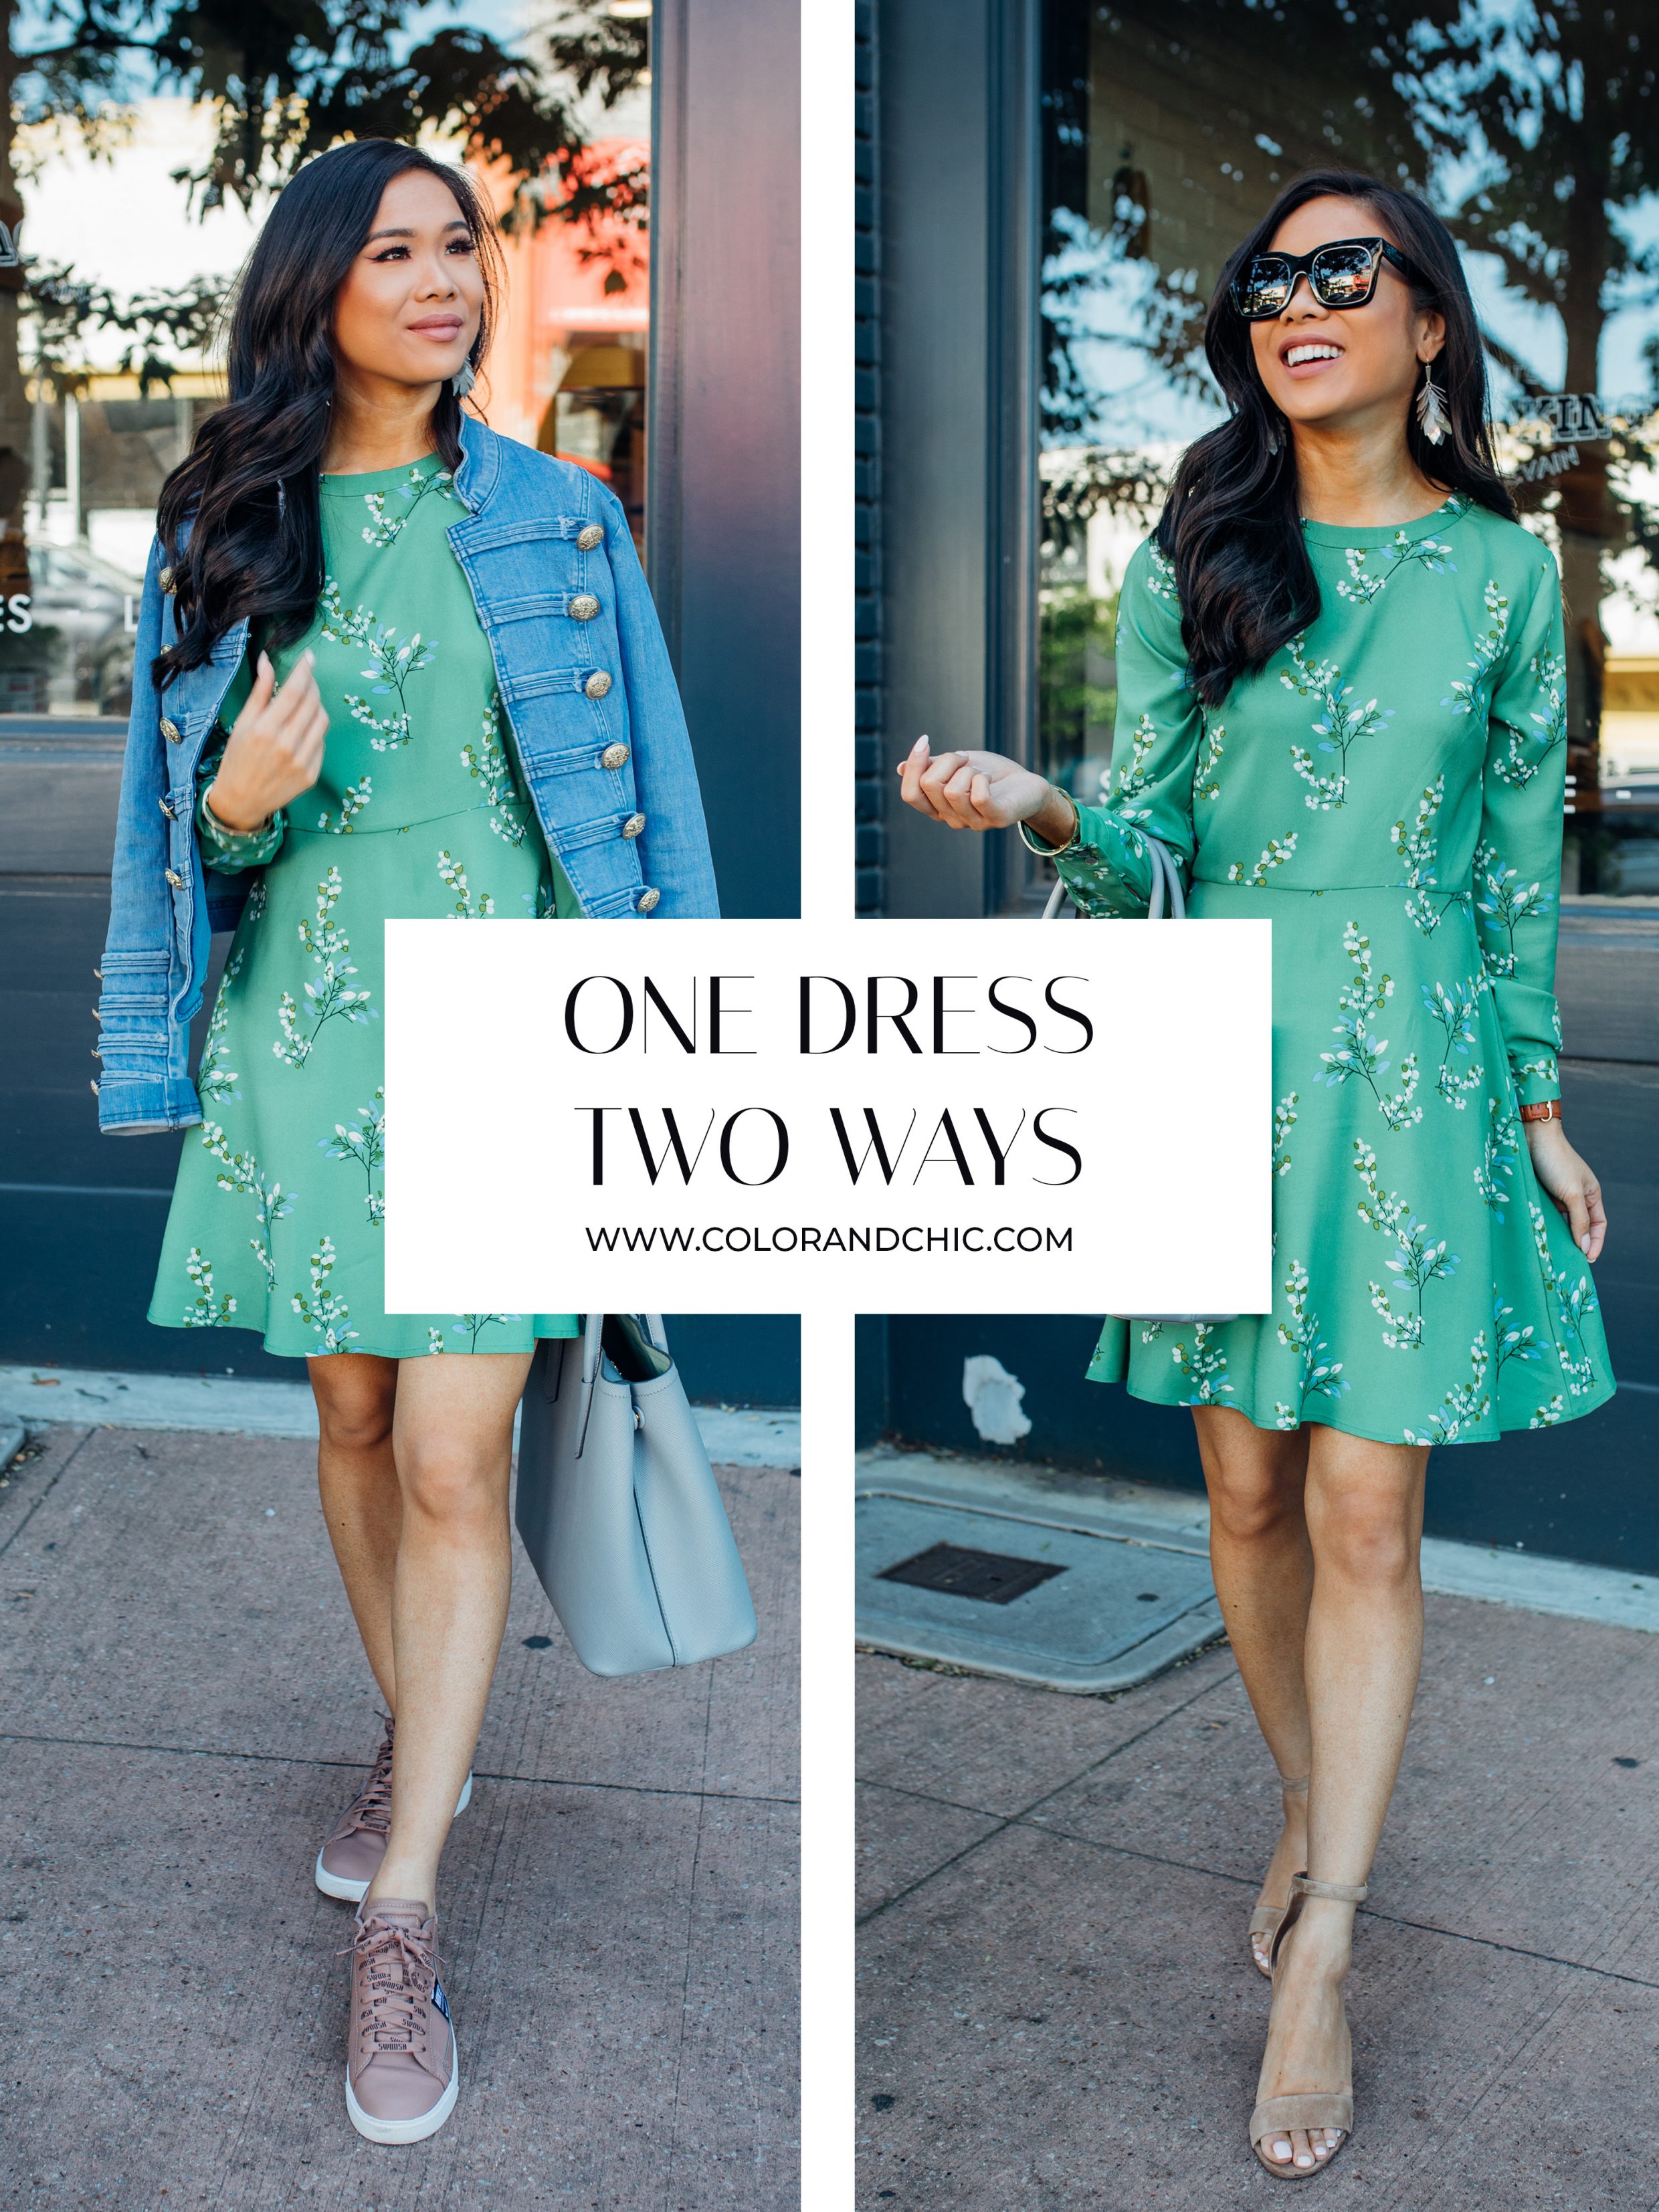 Blogger Hoang-Kim shares how to wear one dress two ways